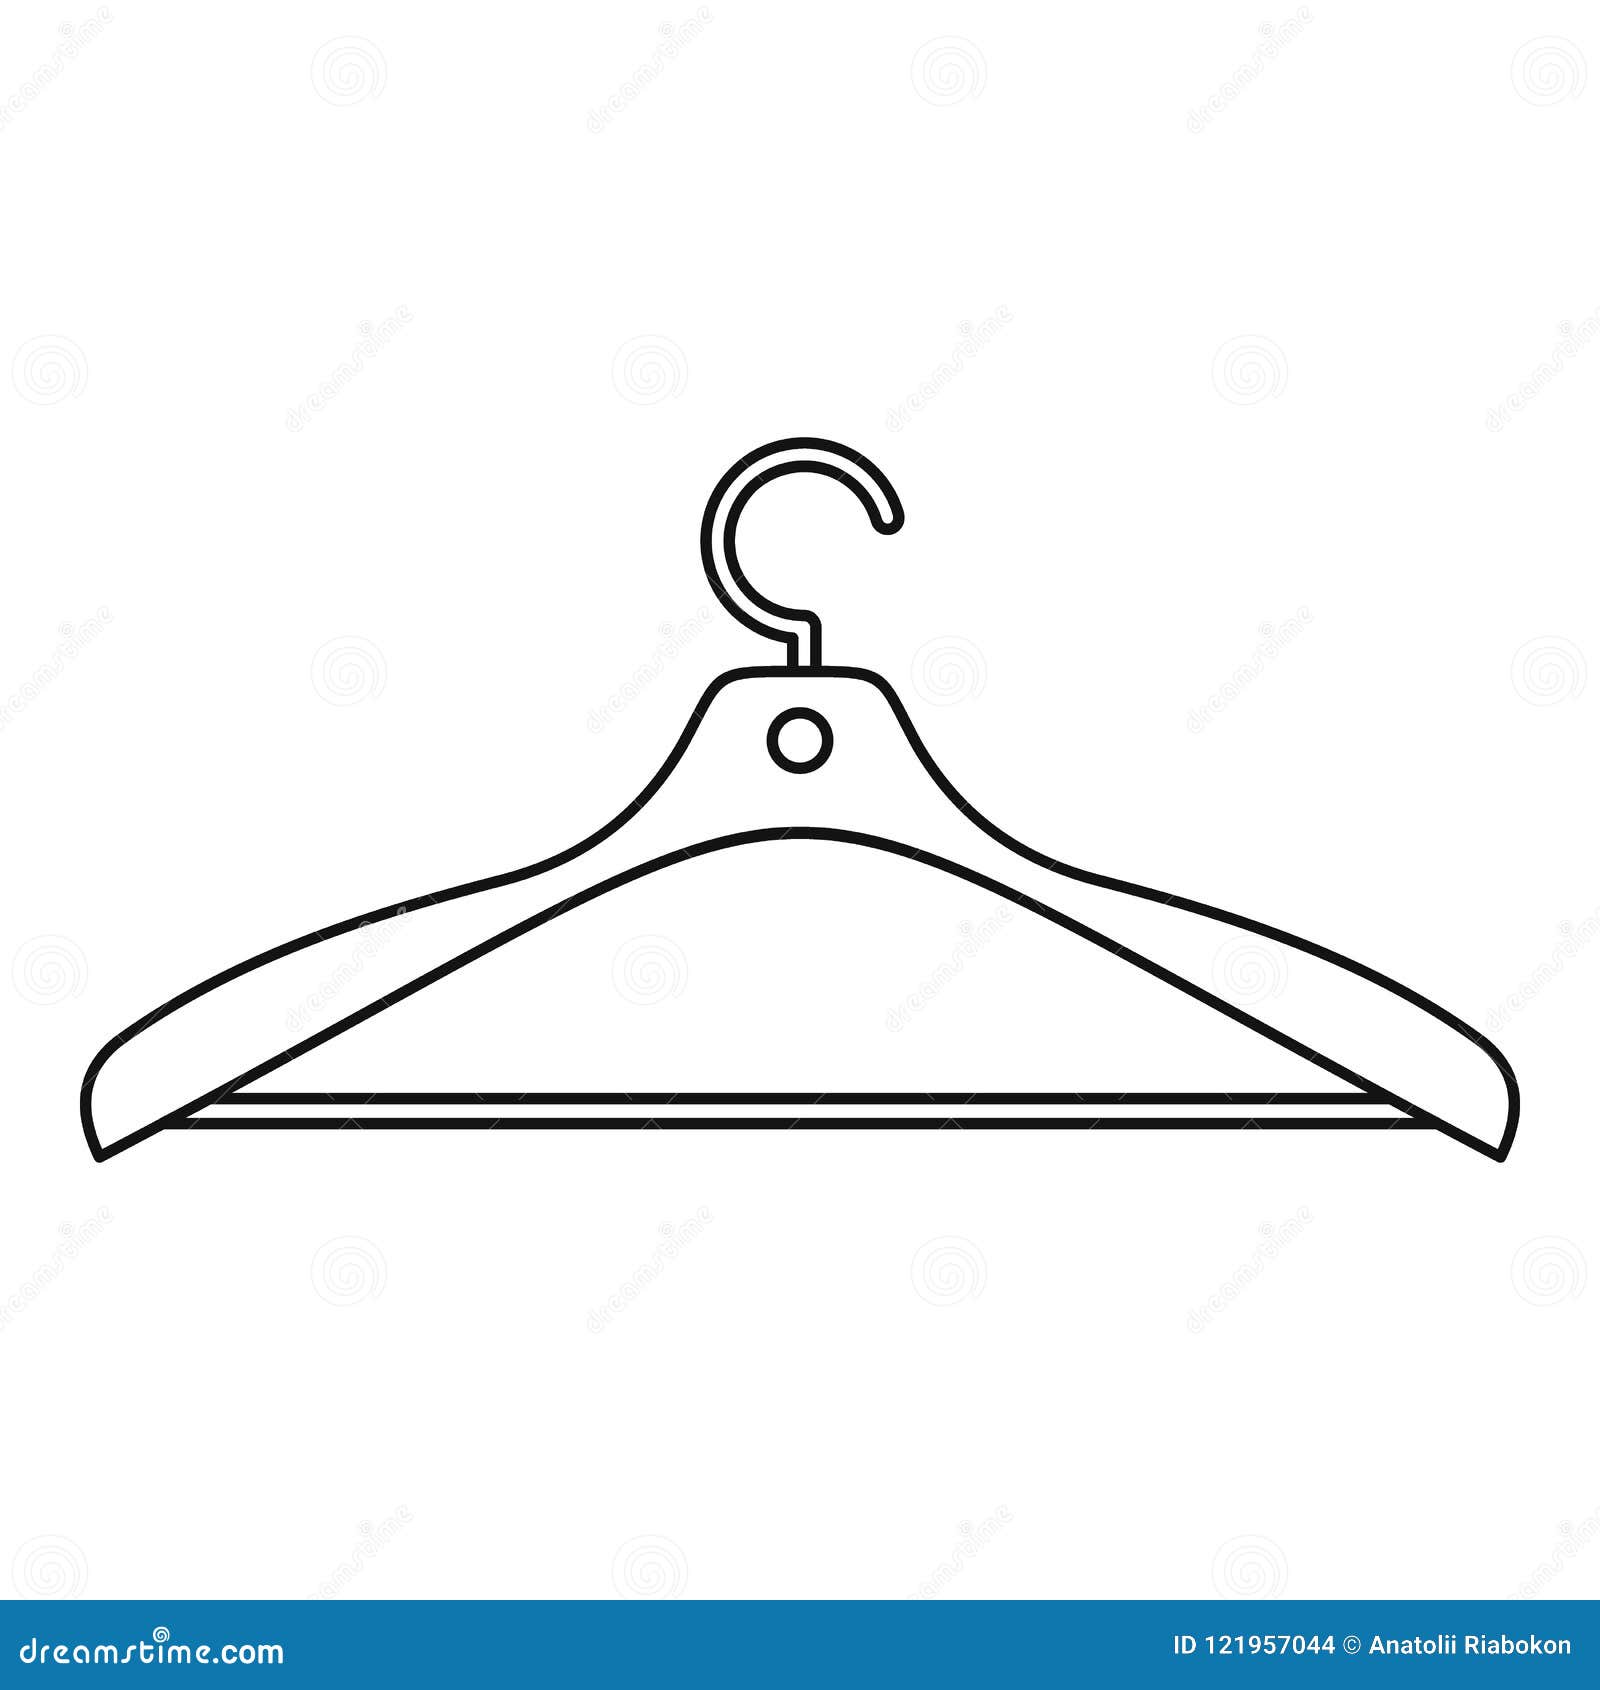 https://thumbs.dreamstime.com/z/clothes-hanger-icon-outline-illustration-clothes-hanger-vector-icon-web-design-isolated-white-background-clothes-hanger-121957044.jpg